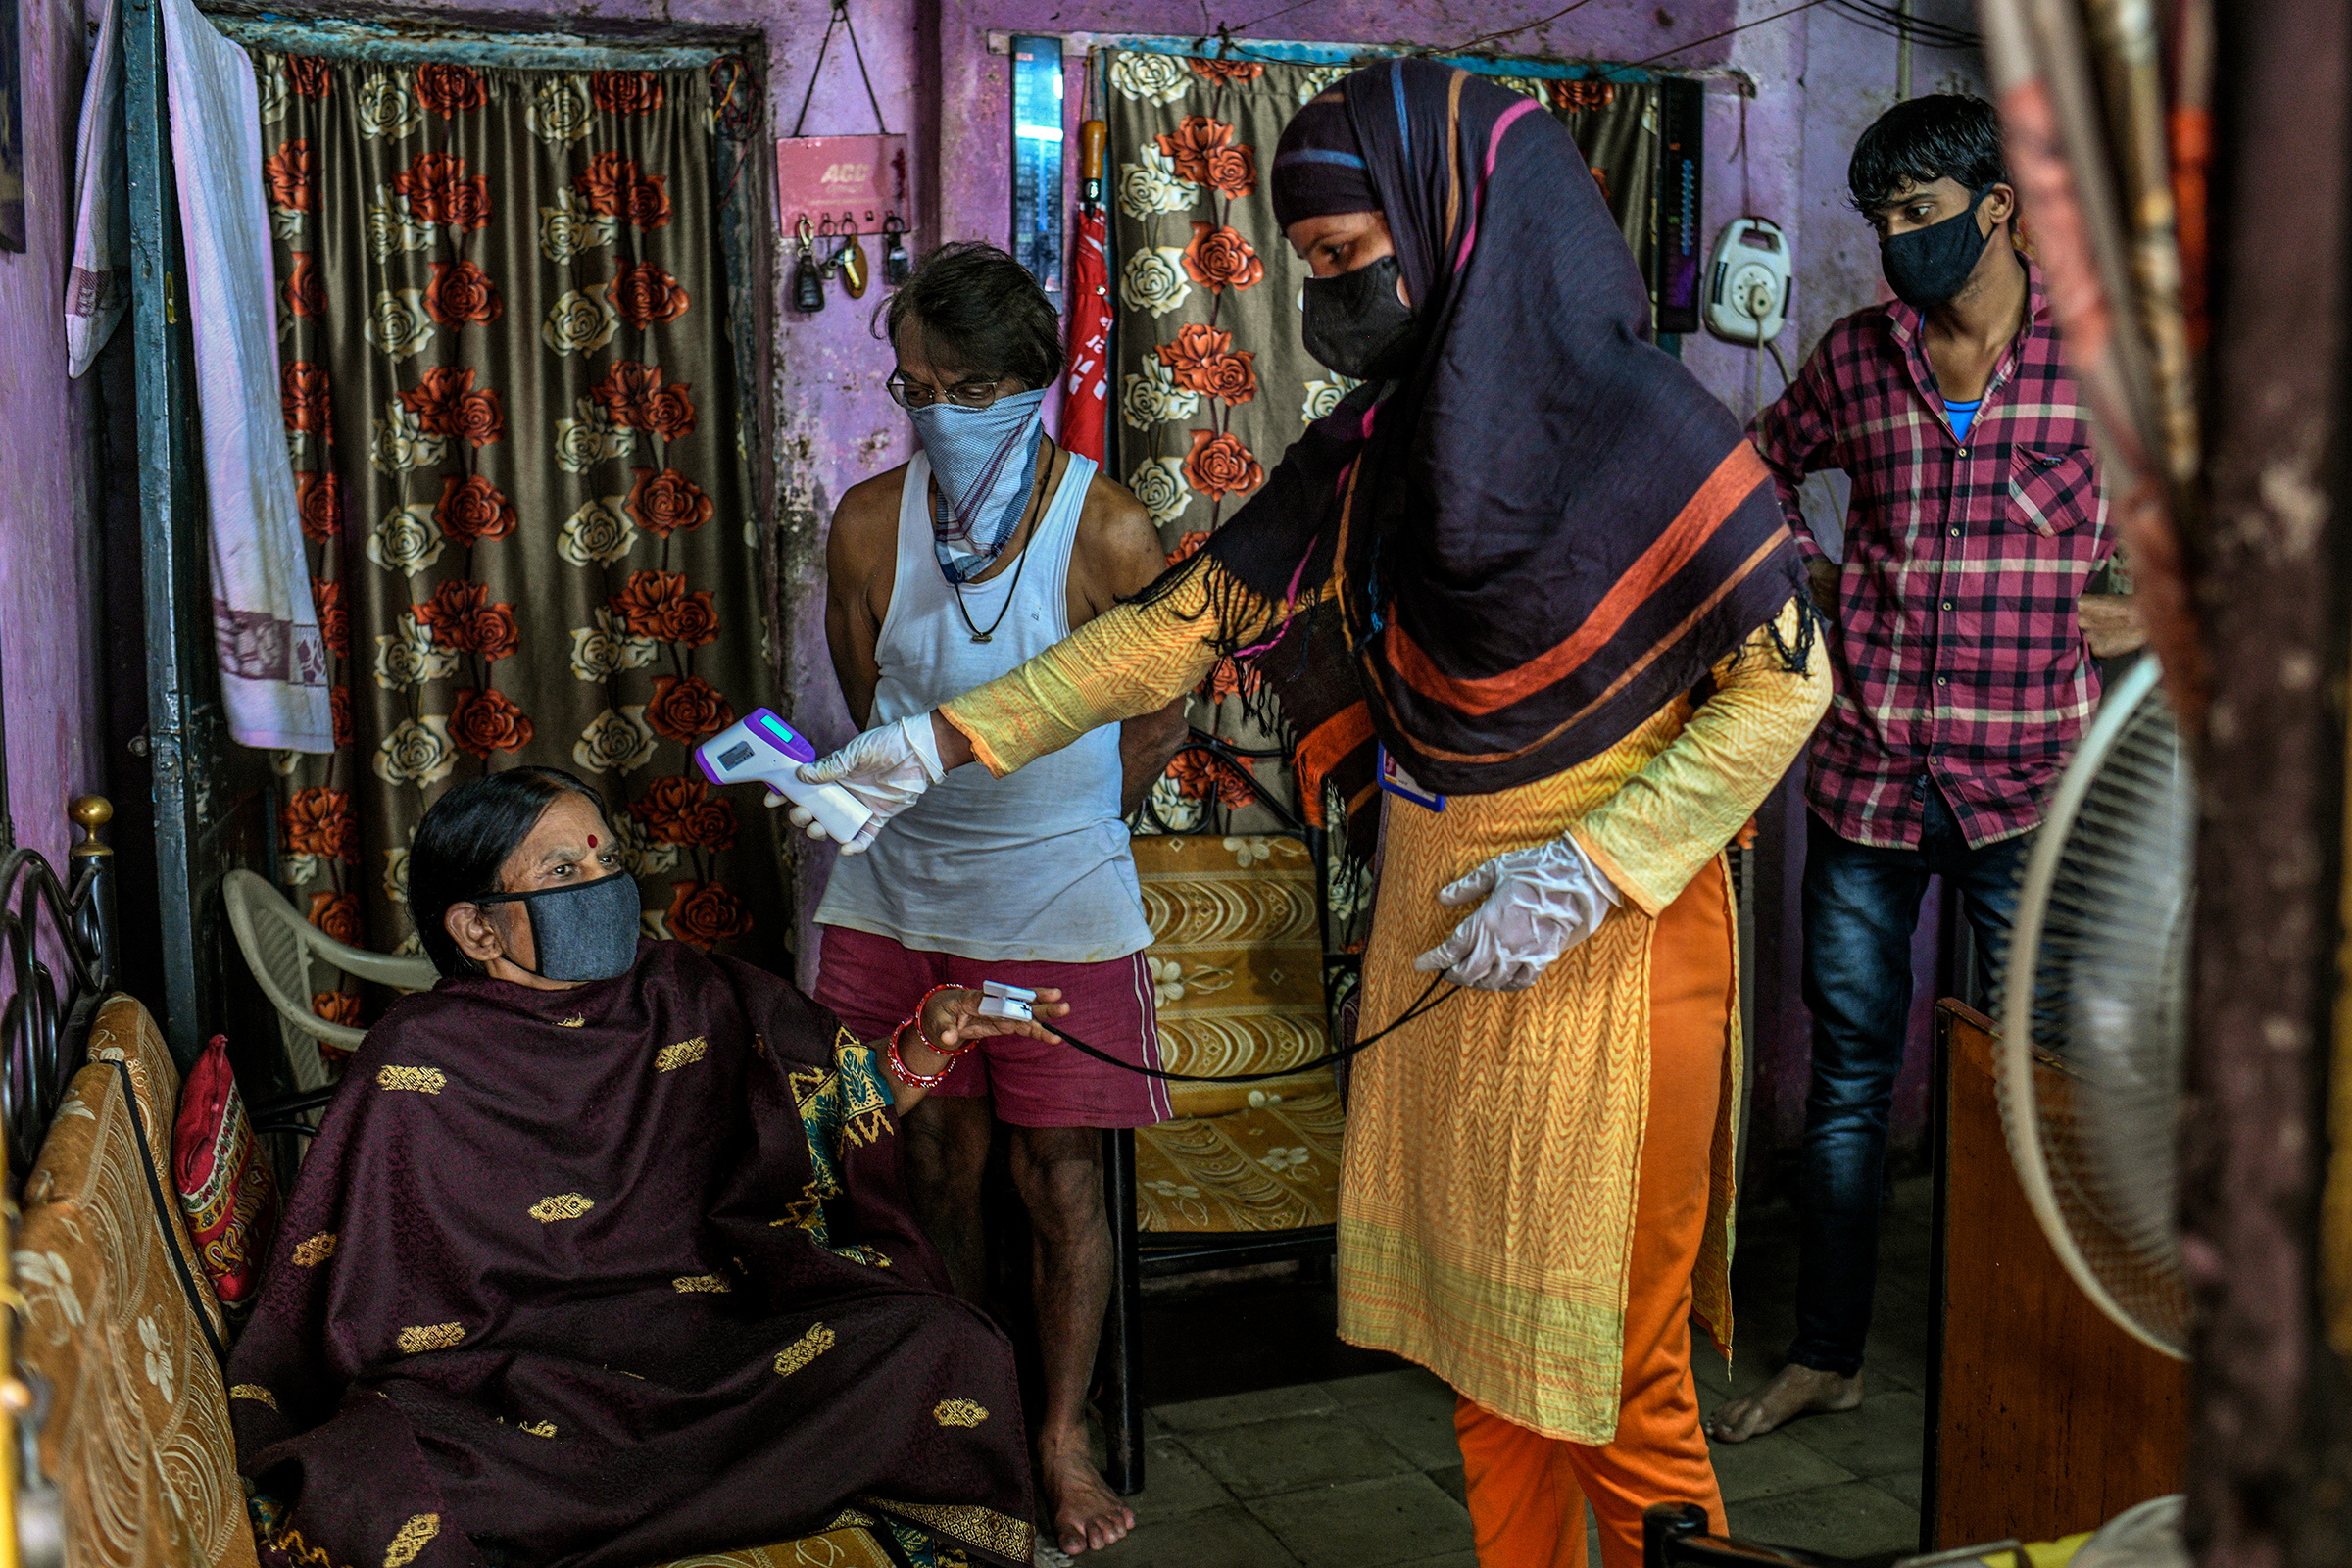 A health care worker checks a woman's temperature and oxygen saturation in the Dhole Patil slum on Aug. 10.